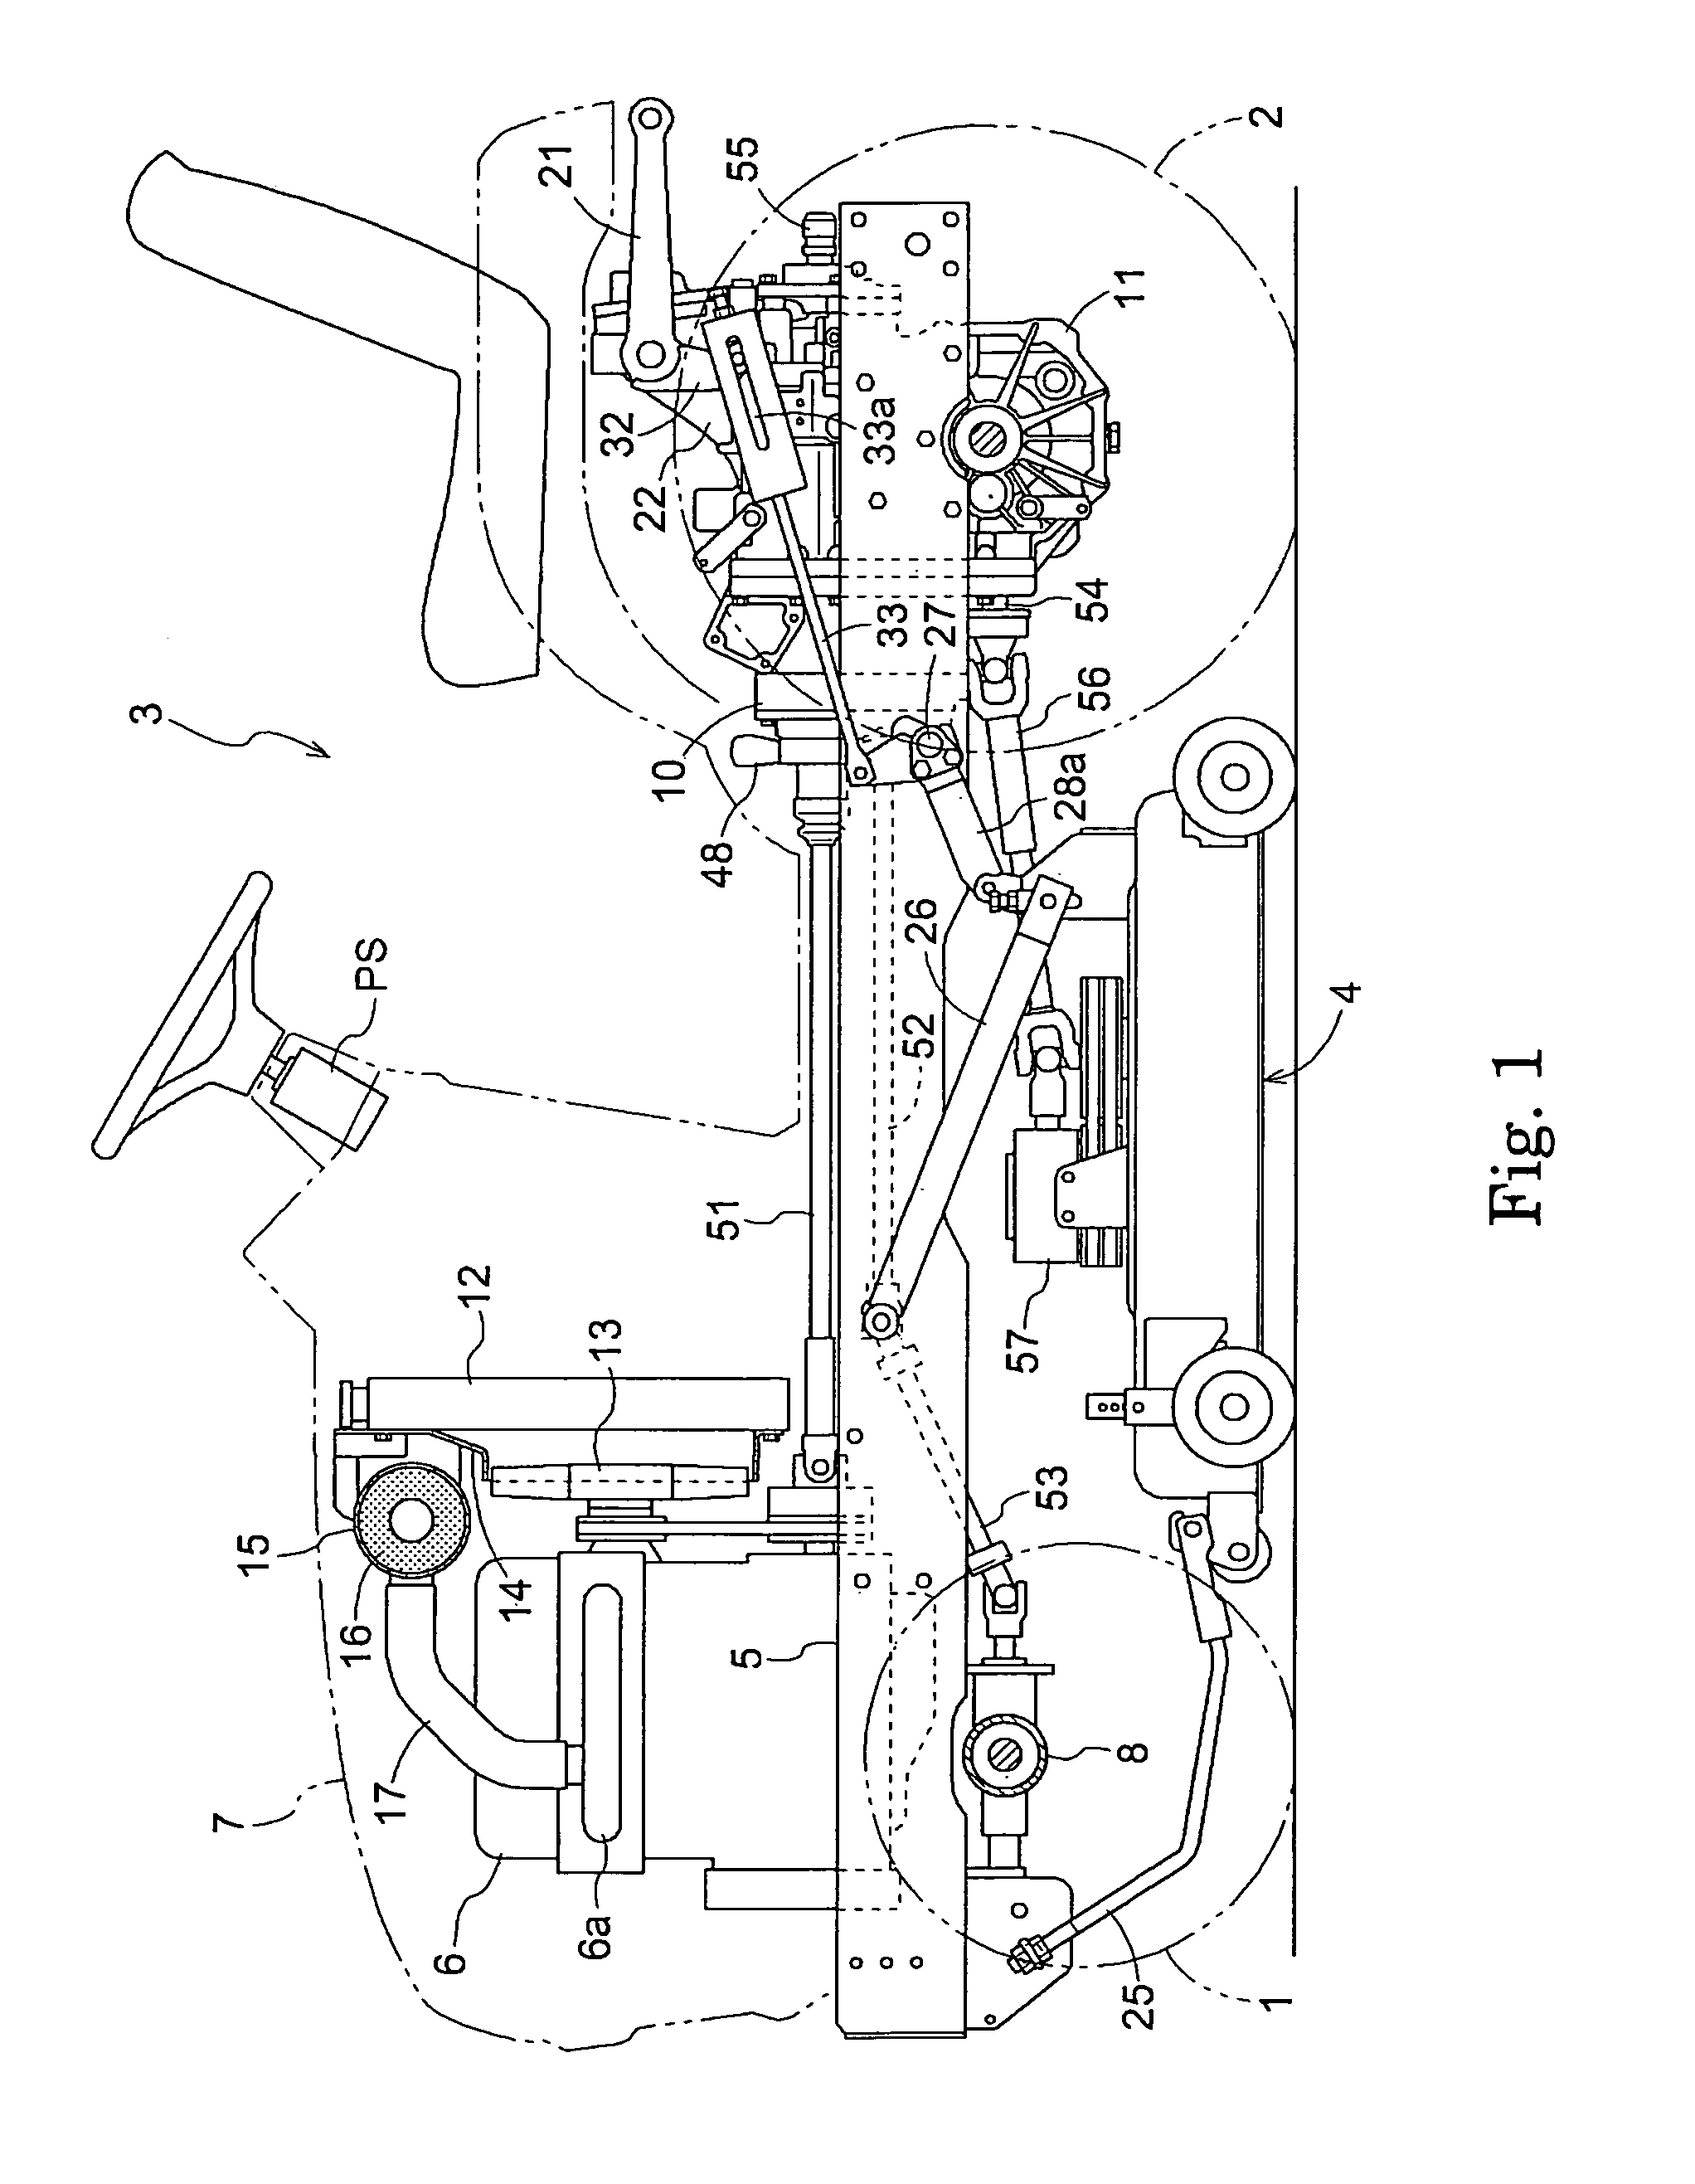 Hydrostatic continuously variable transmission